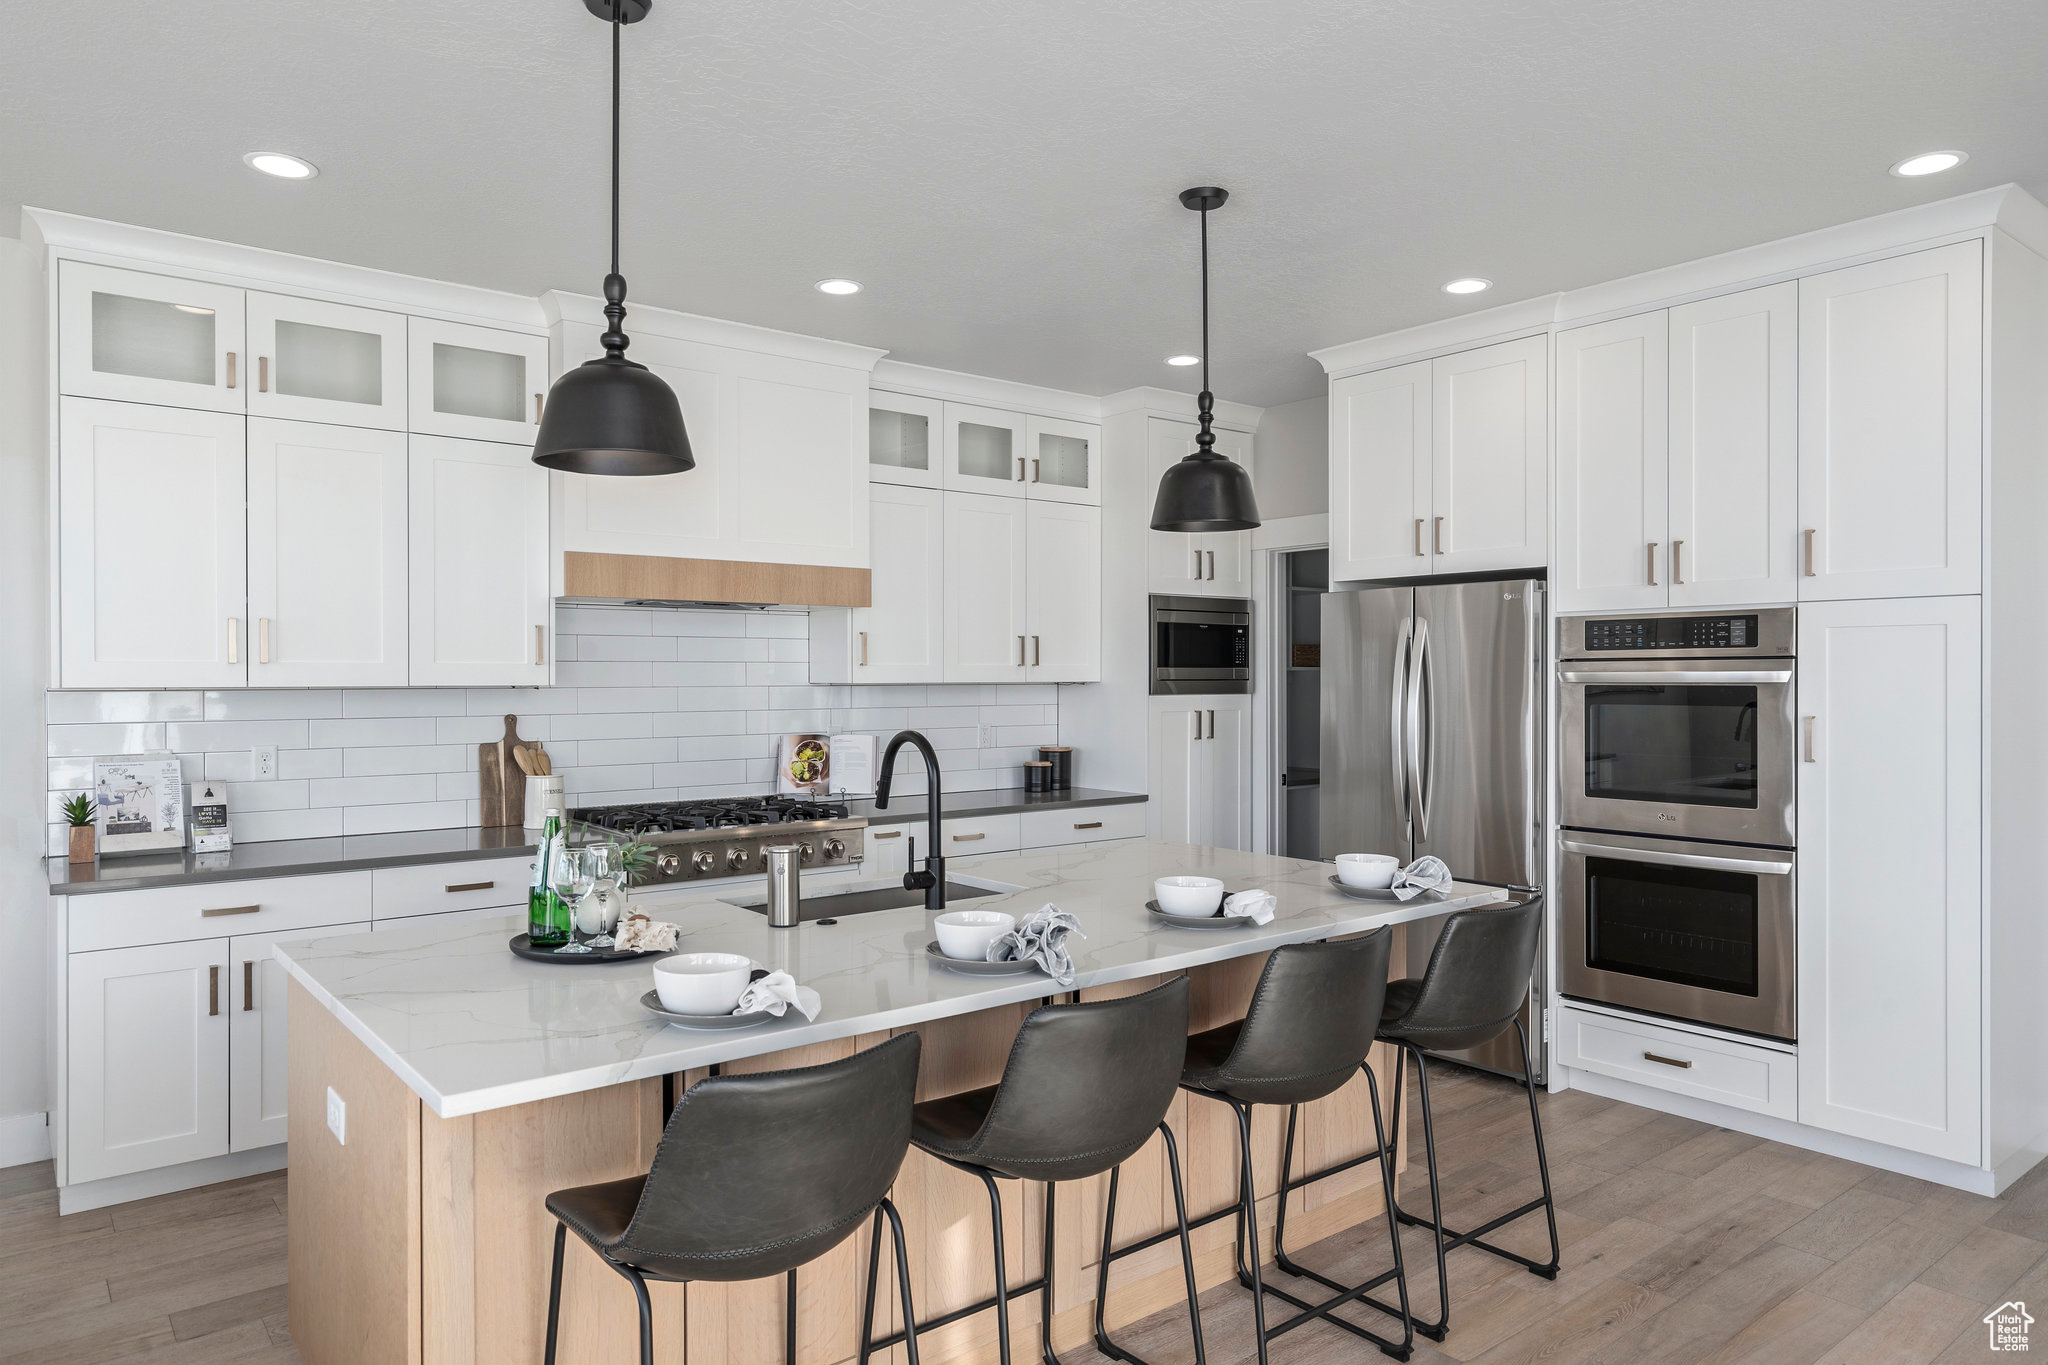 Kitchen featuring a kitchen island with sink, appliances with stainless steel finishes, white cabinetry, and decorative light fixtures